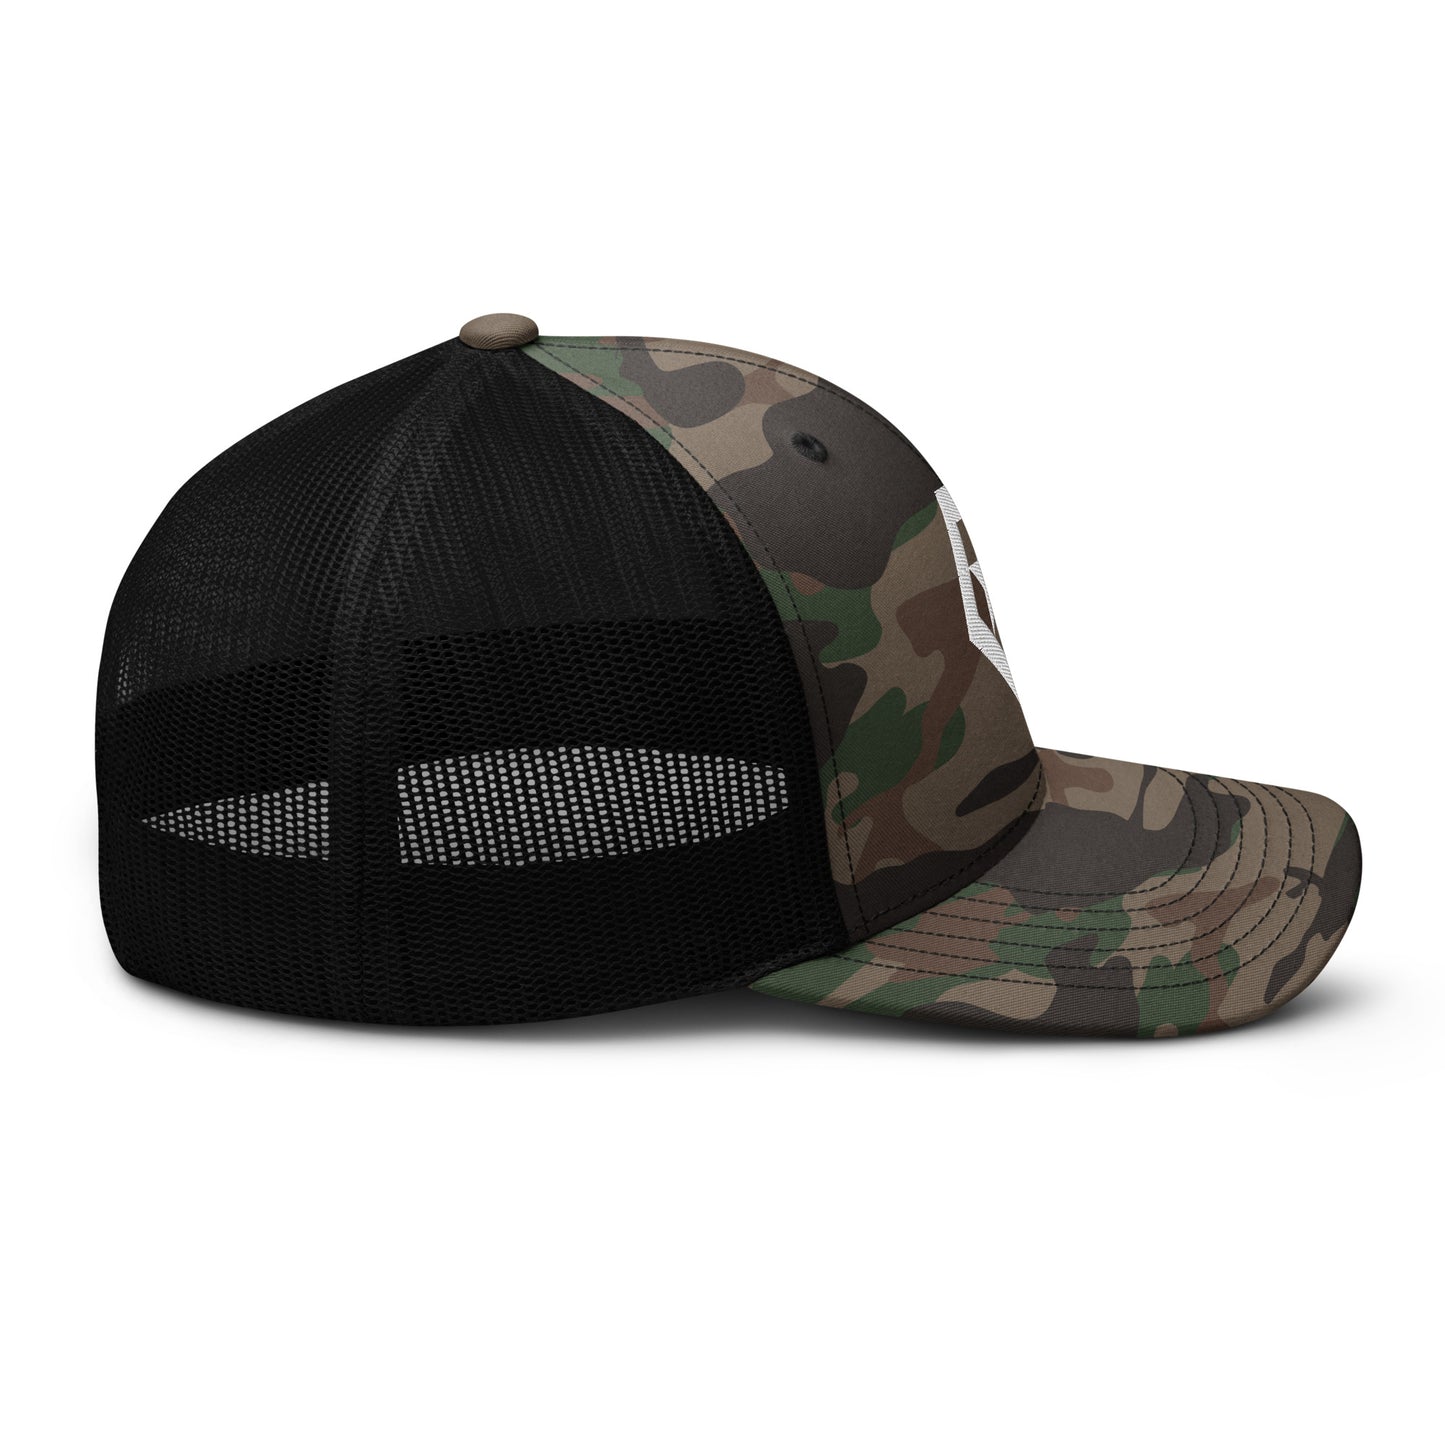 GENERAL STAR CAMO TRUCKER HAT - The Official General Booty Shop